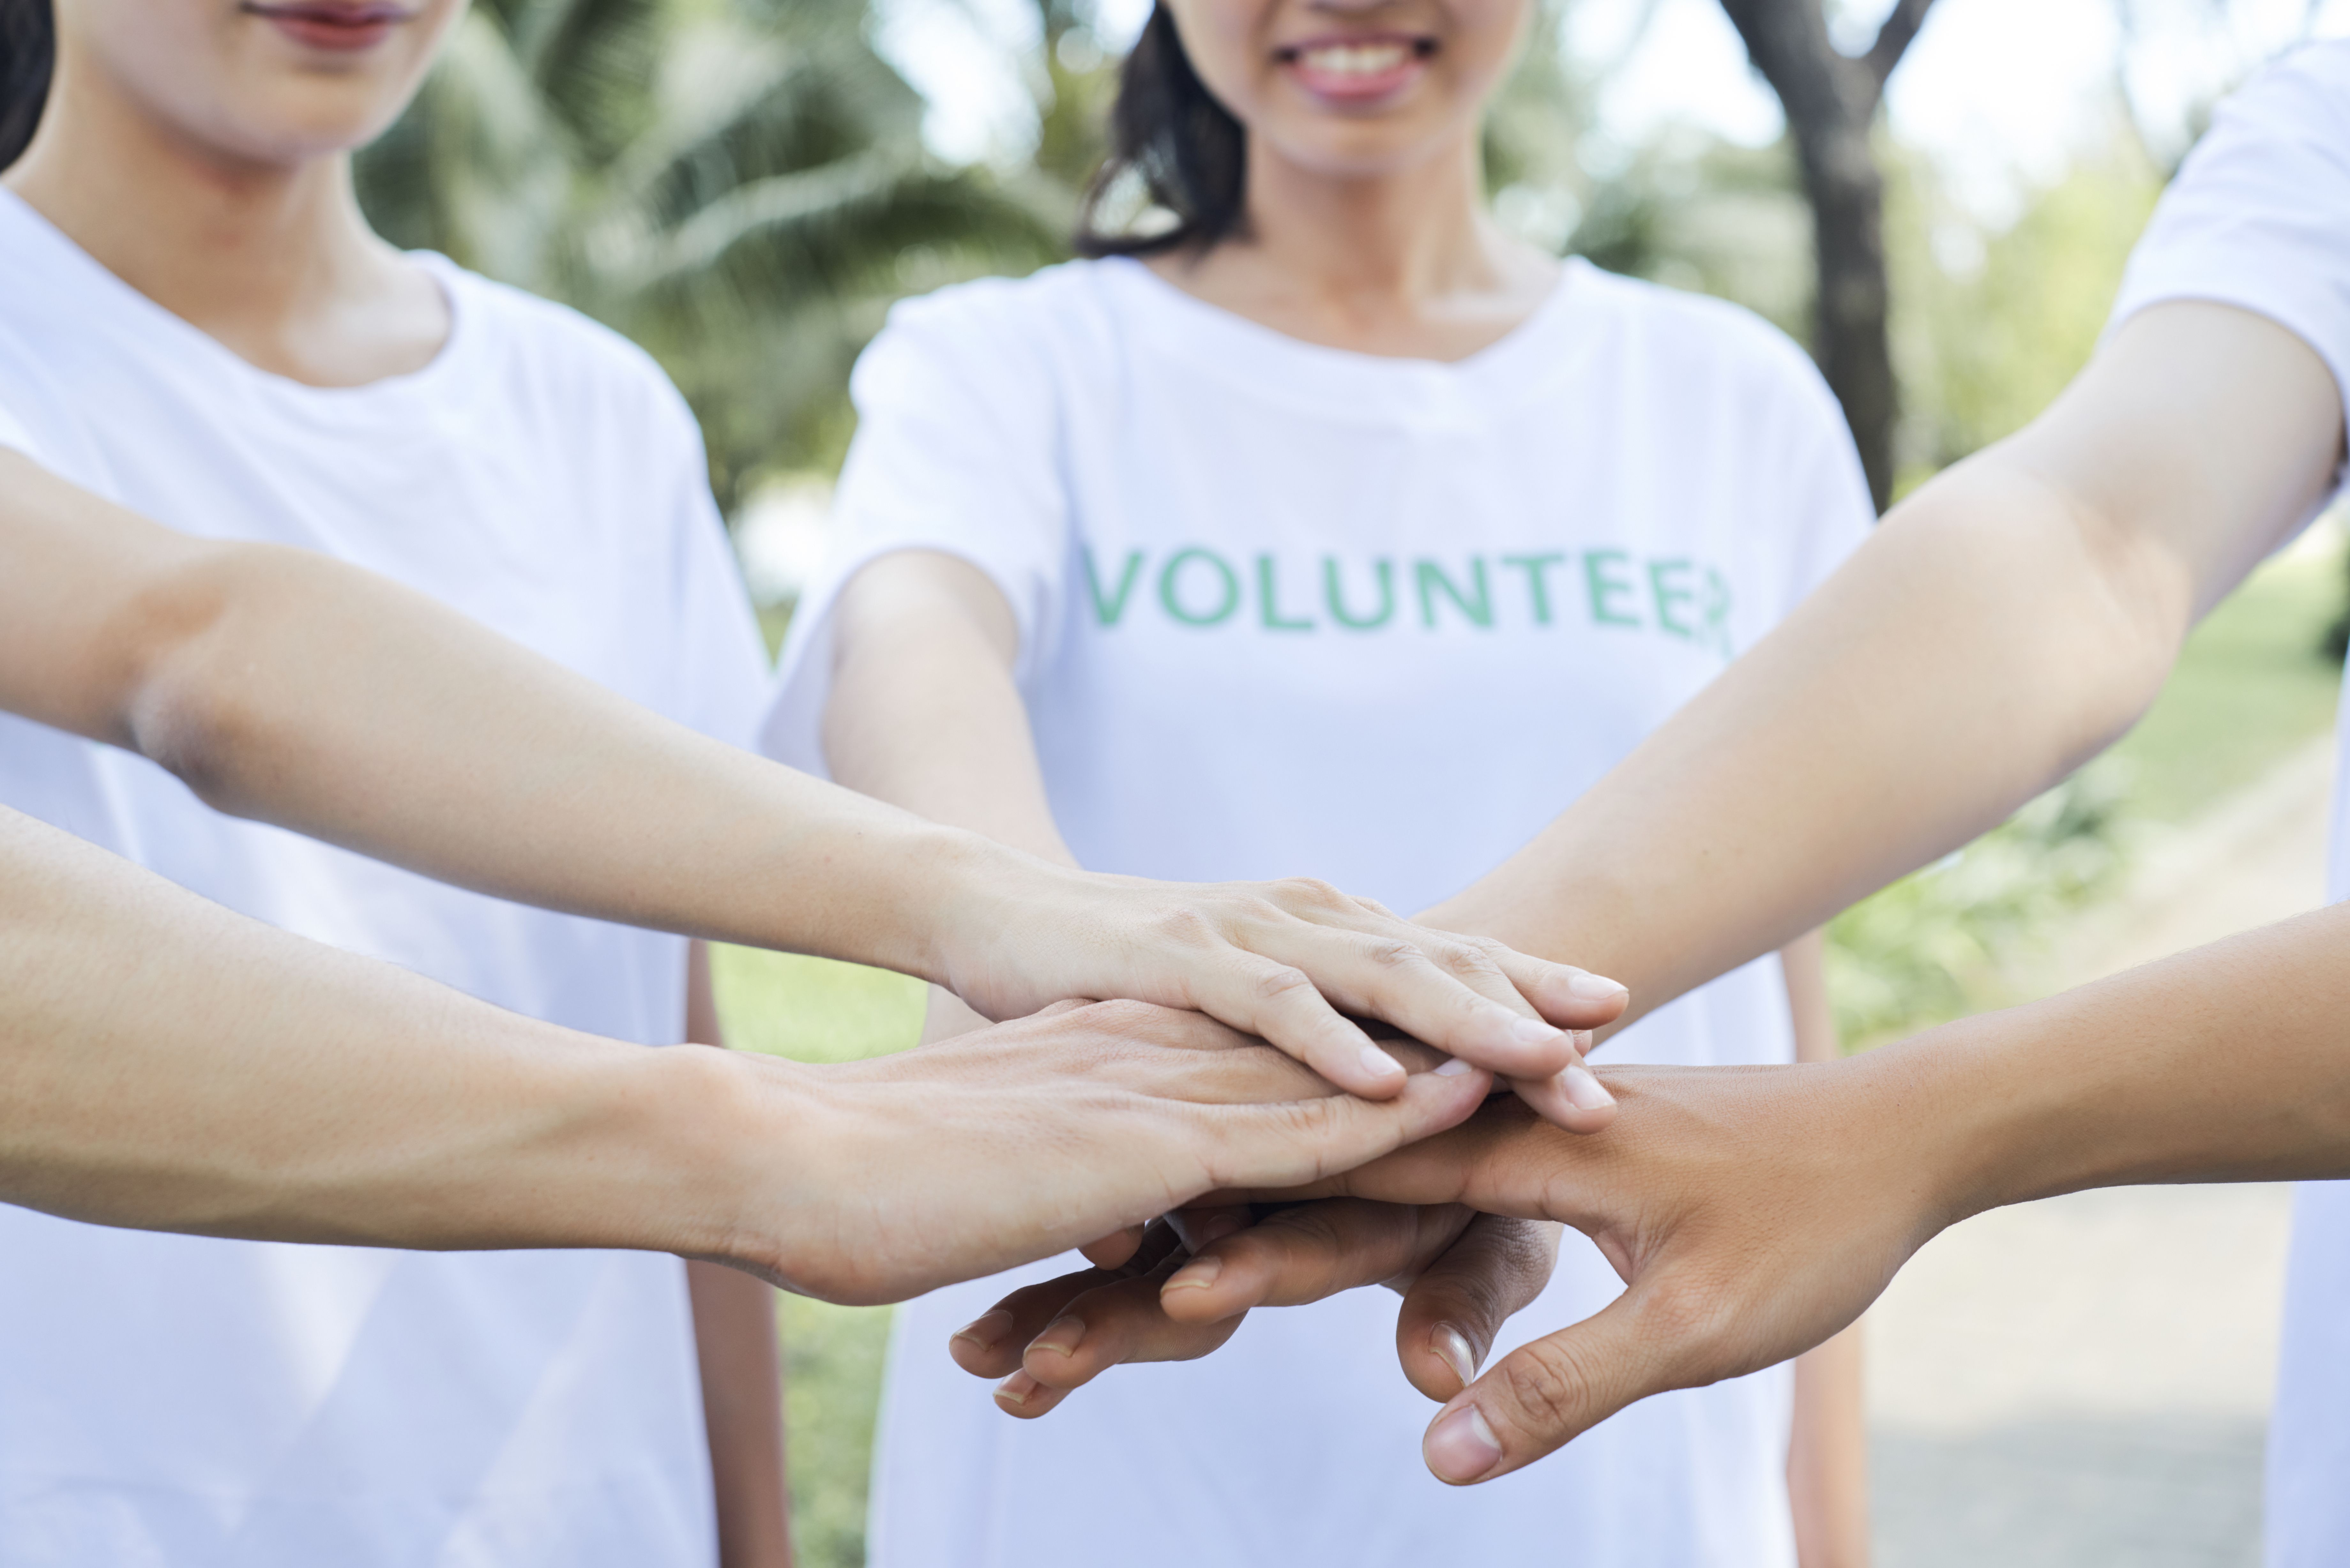 Image of several people holding their hands together in a represenation of teamwork and including a woman wearing a t-shirt labeled "volunteer"